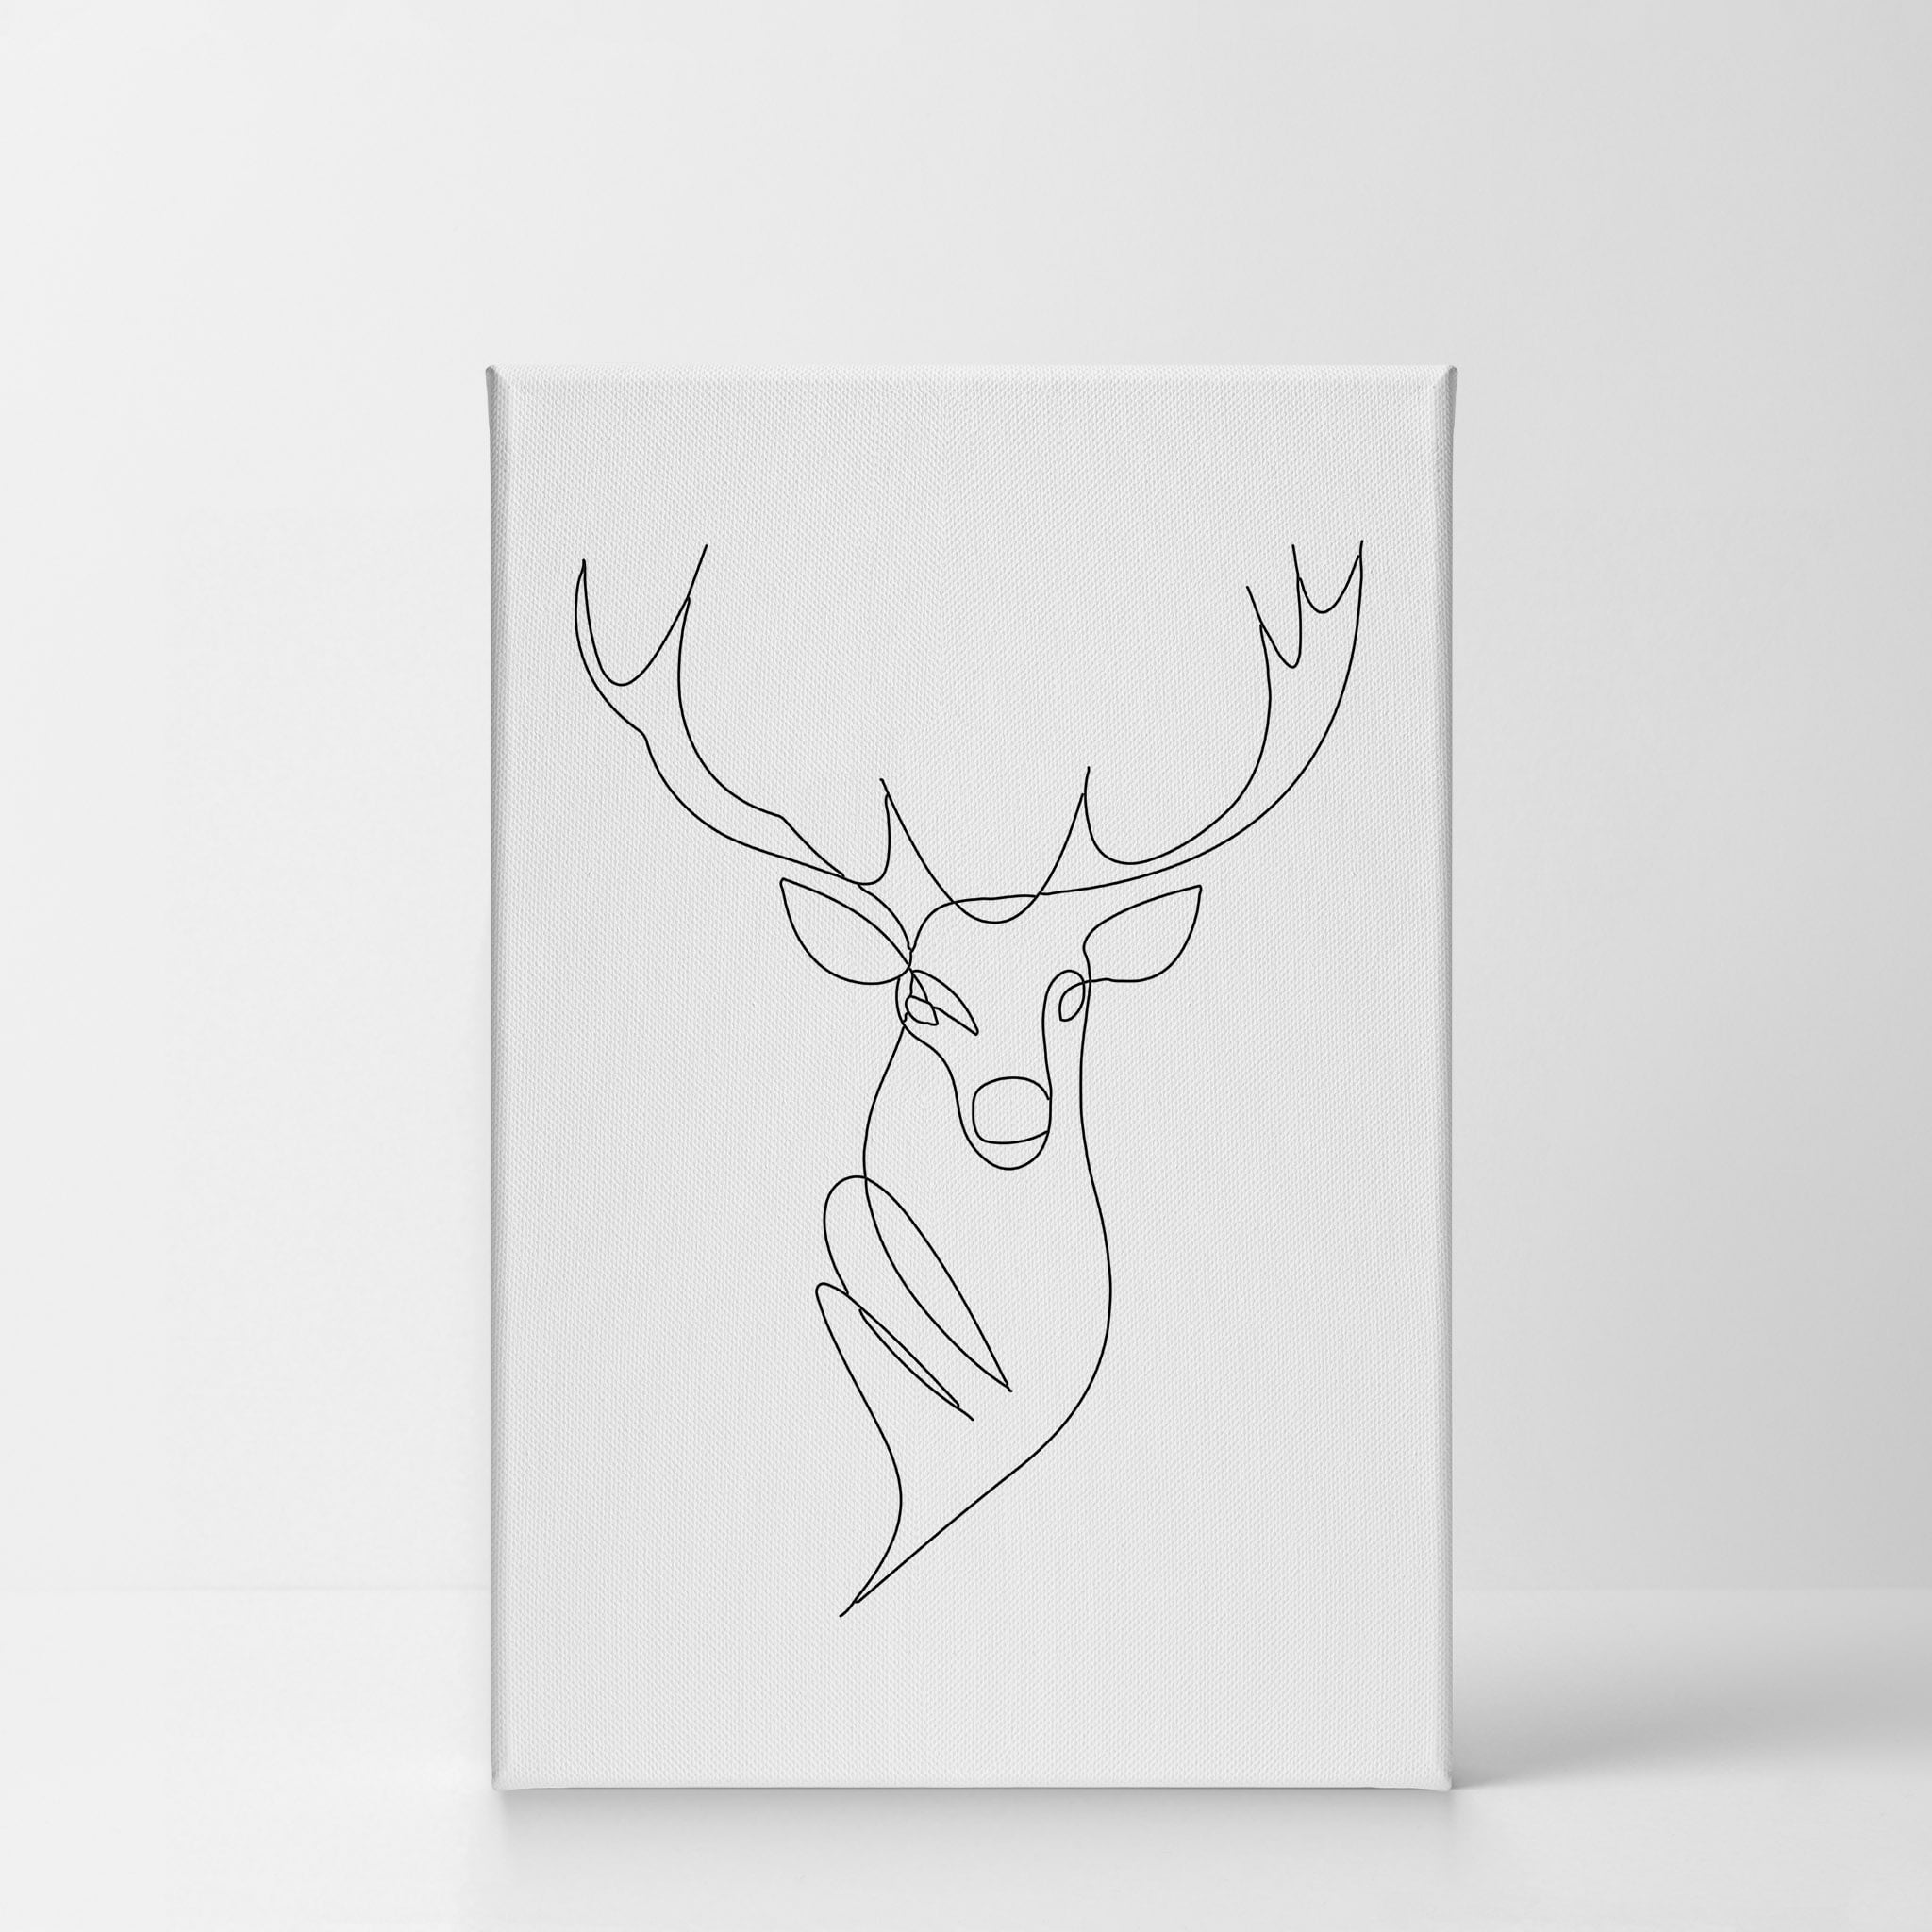 Smile Art Design Black and White One Line Minimalism Art Deer Bust Animal  Abstract Canvas Wall Art Print Office Living Room Dorm Bedroom Aesthetic  Modern Home Decor - 40x30